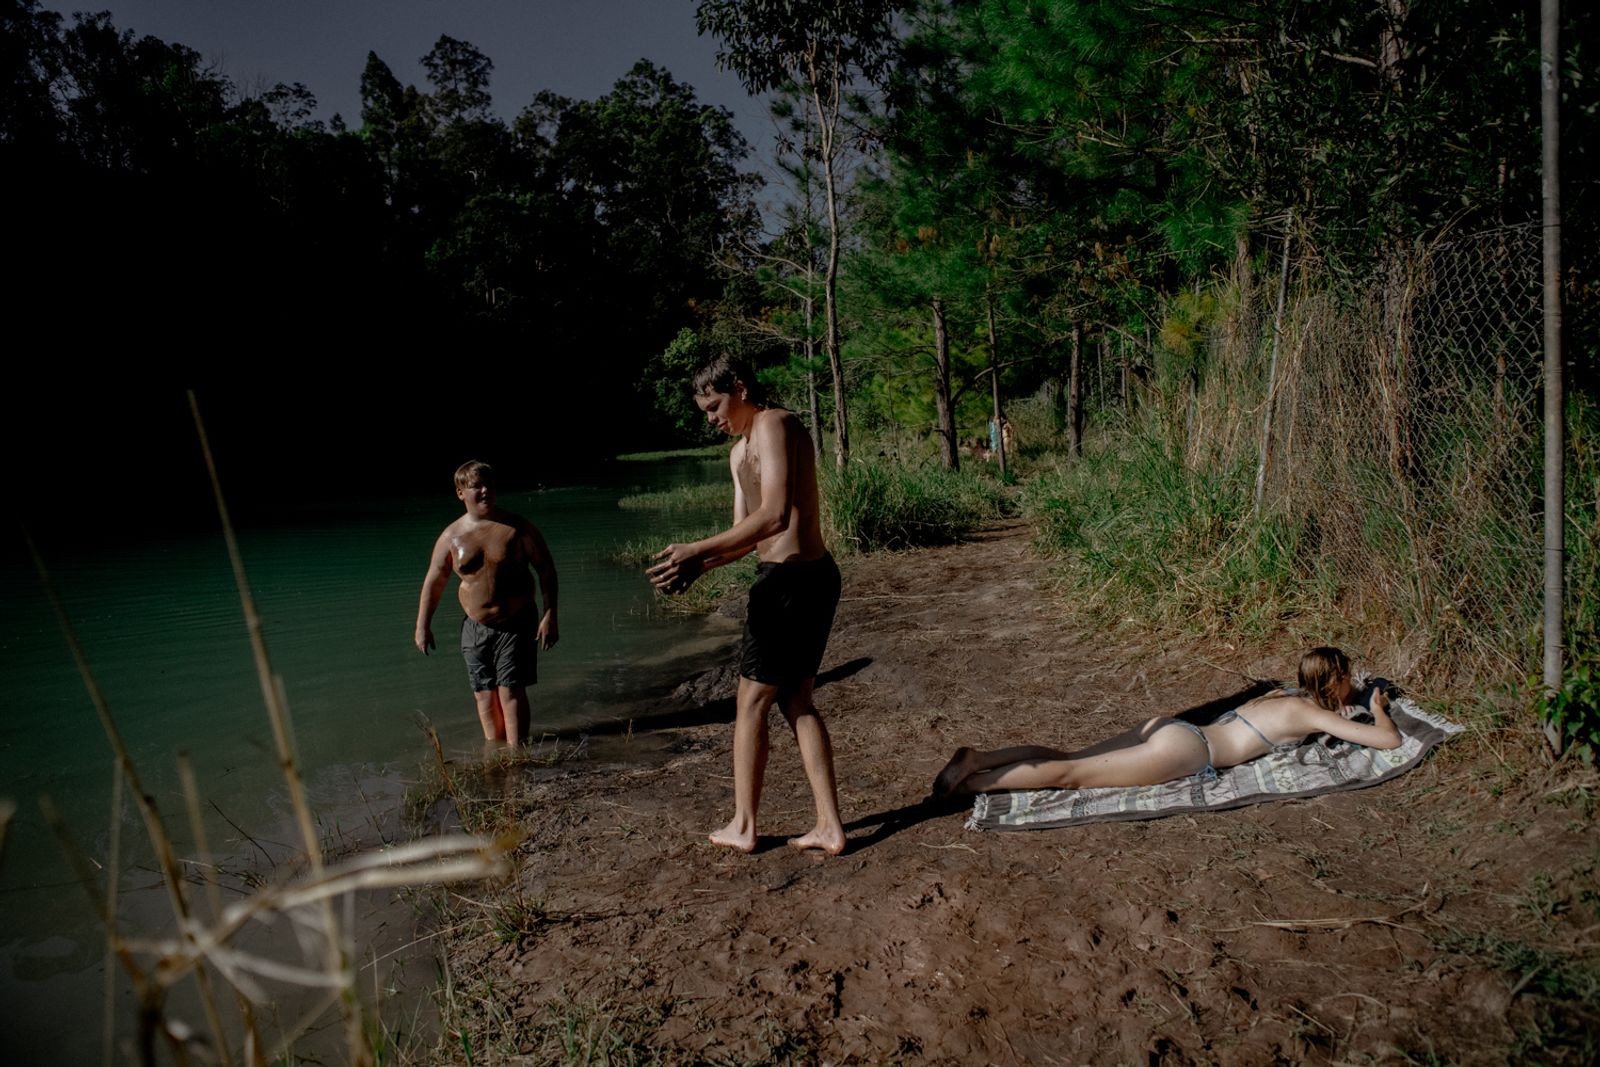 © Tajette O'halloran - Boys cover their bodies in mud while a girl sunbathes and looks at her phone